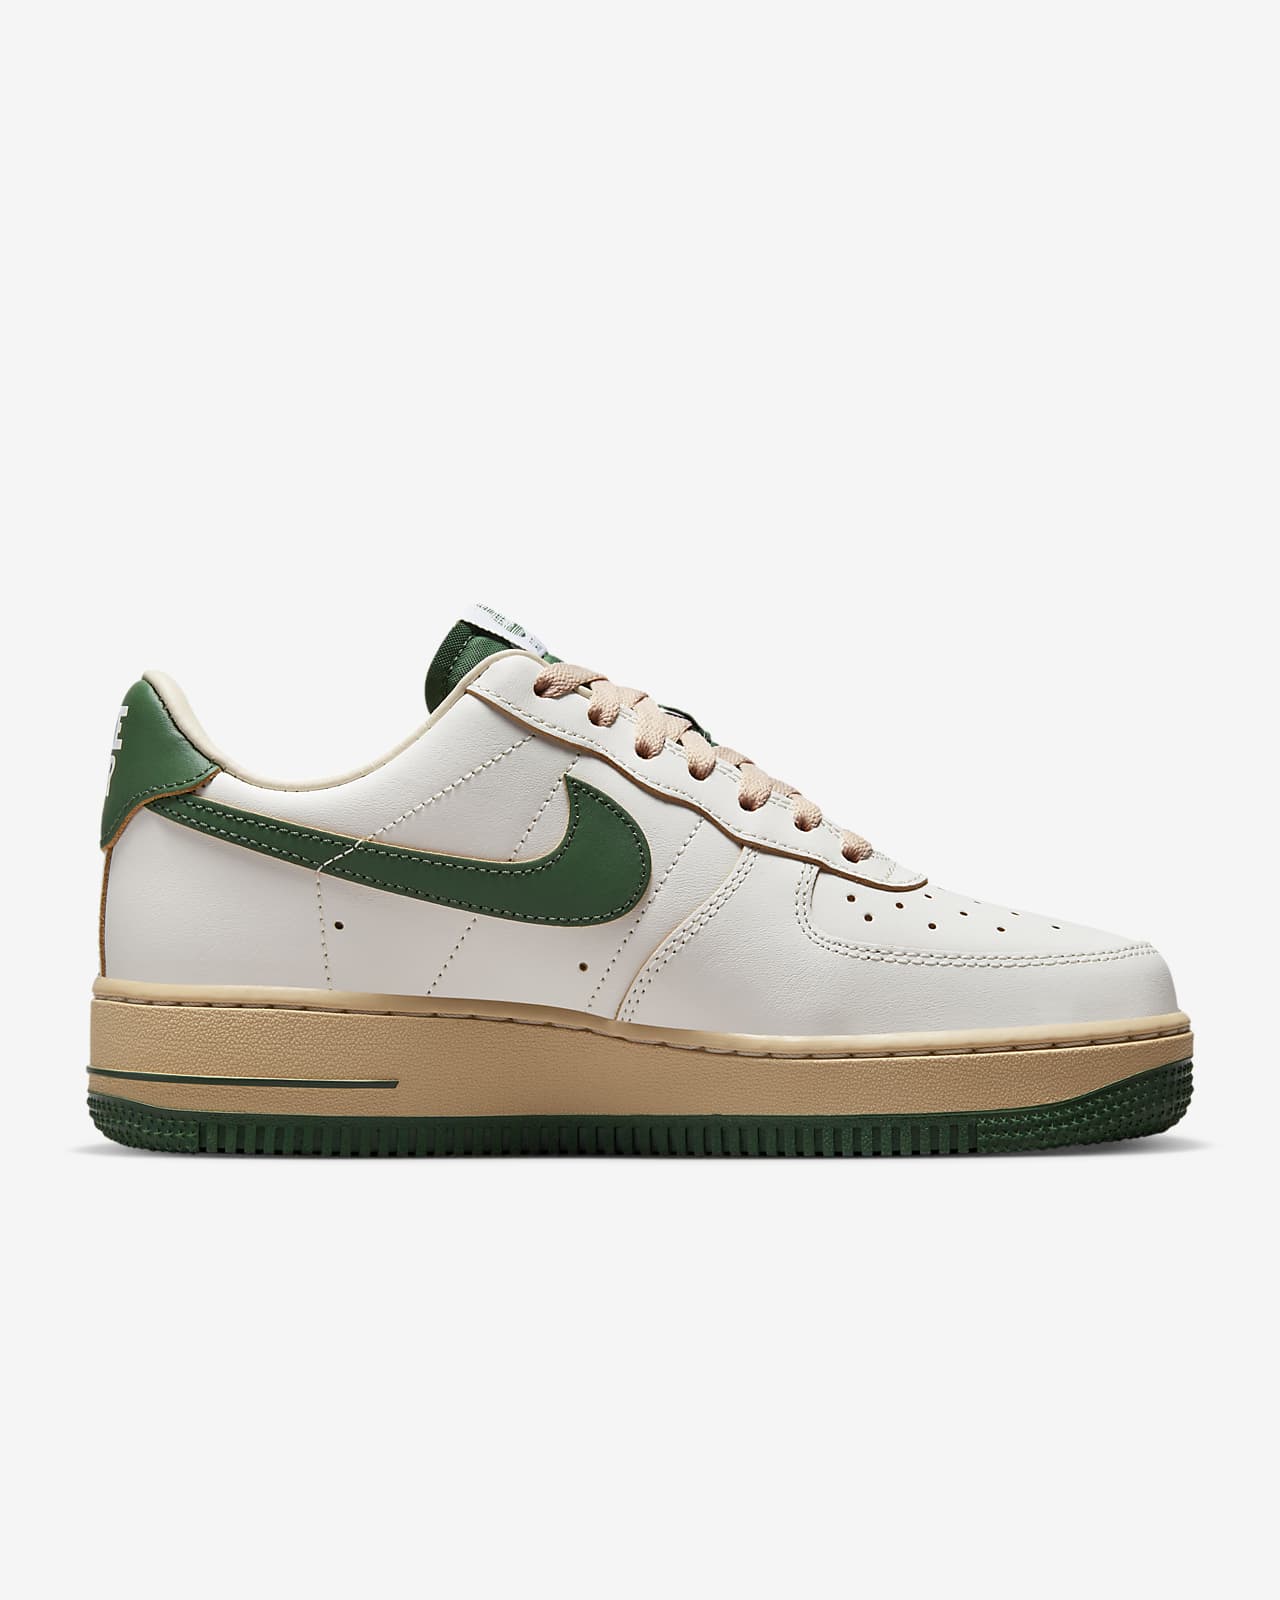 Chaussures Nike Air Force 1 '07 LV8 pour femme. Nike FR